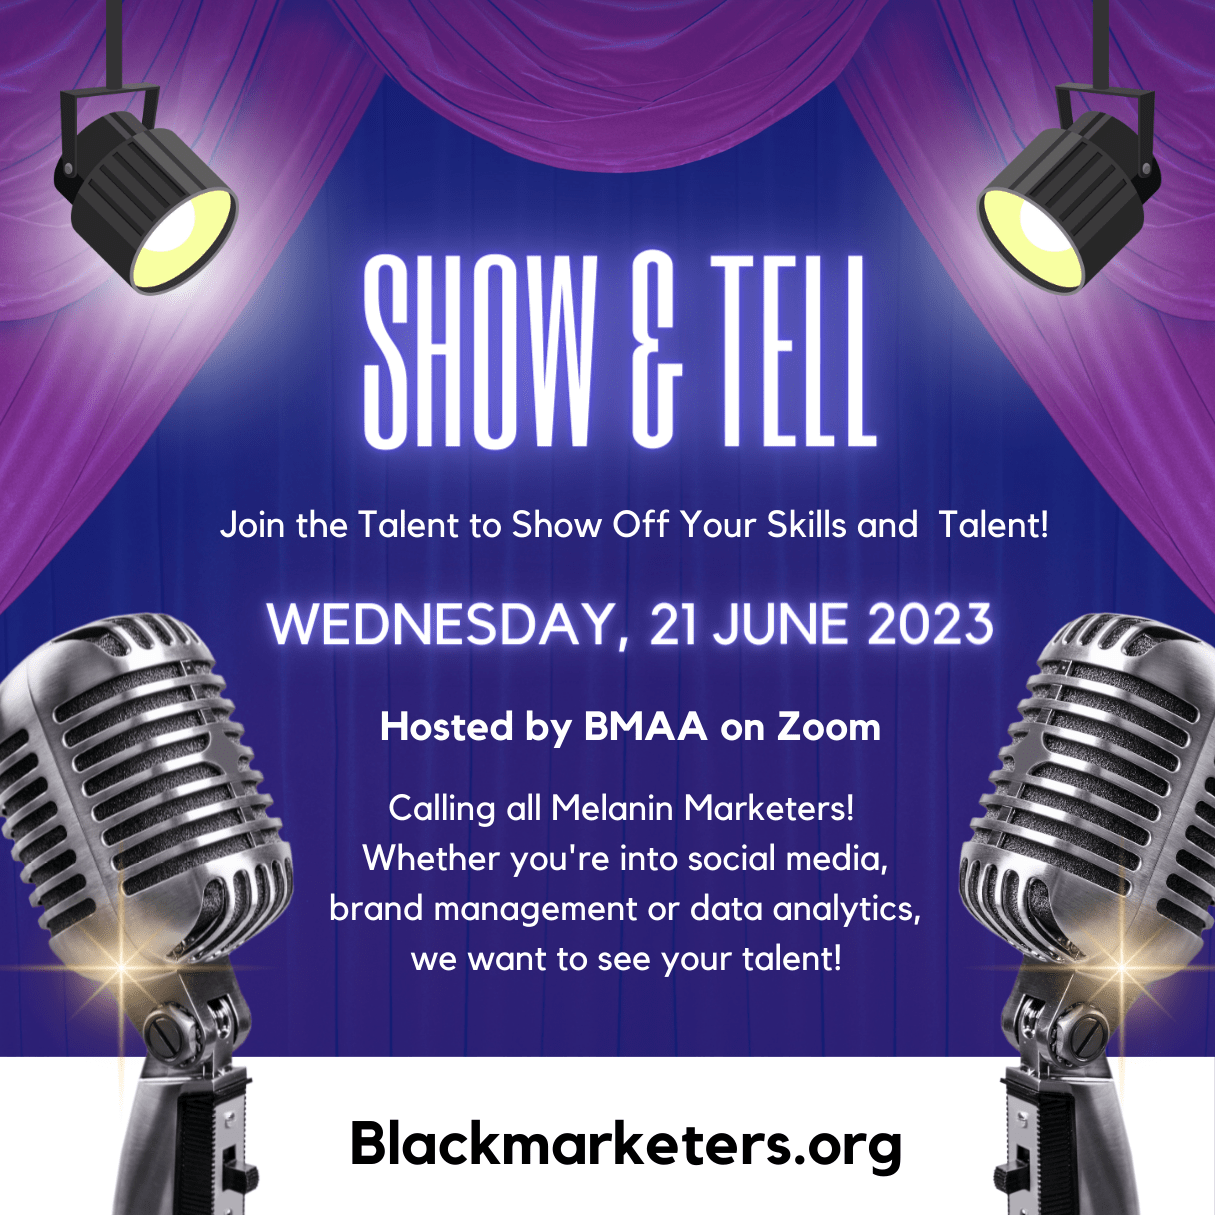 BMAA SHOW & TELL